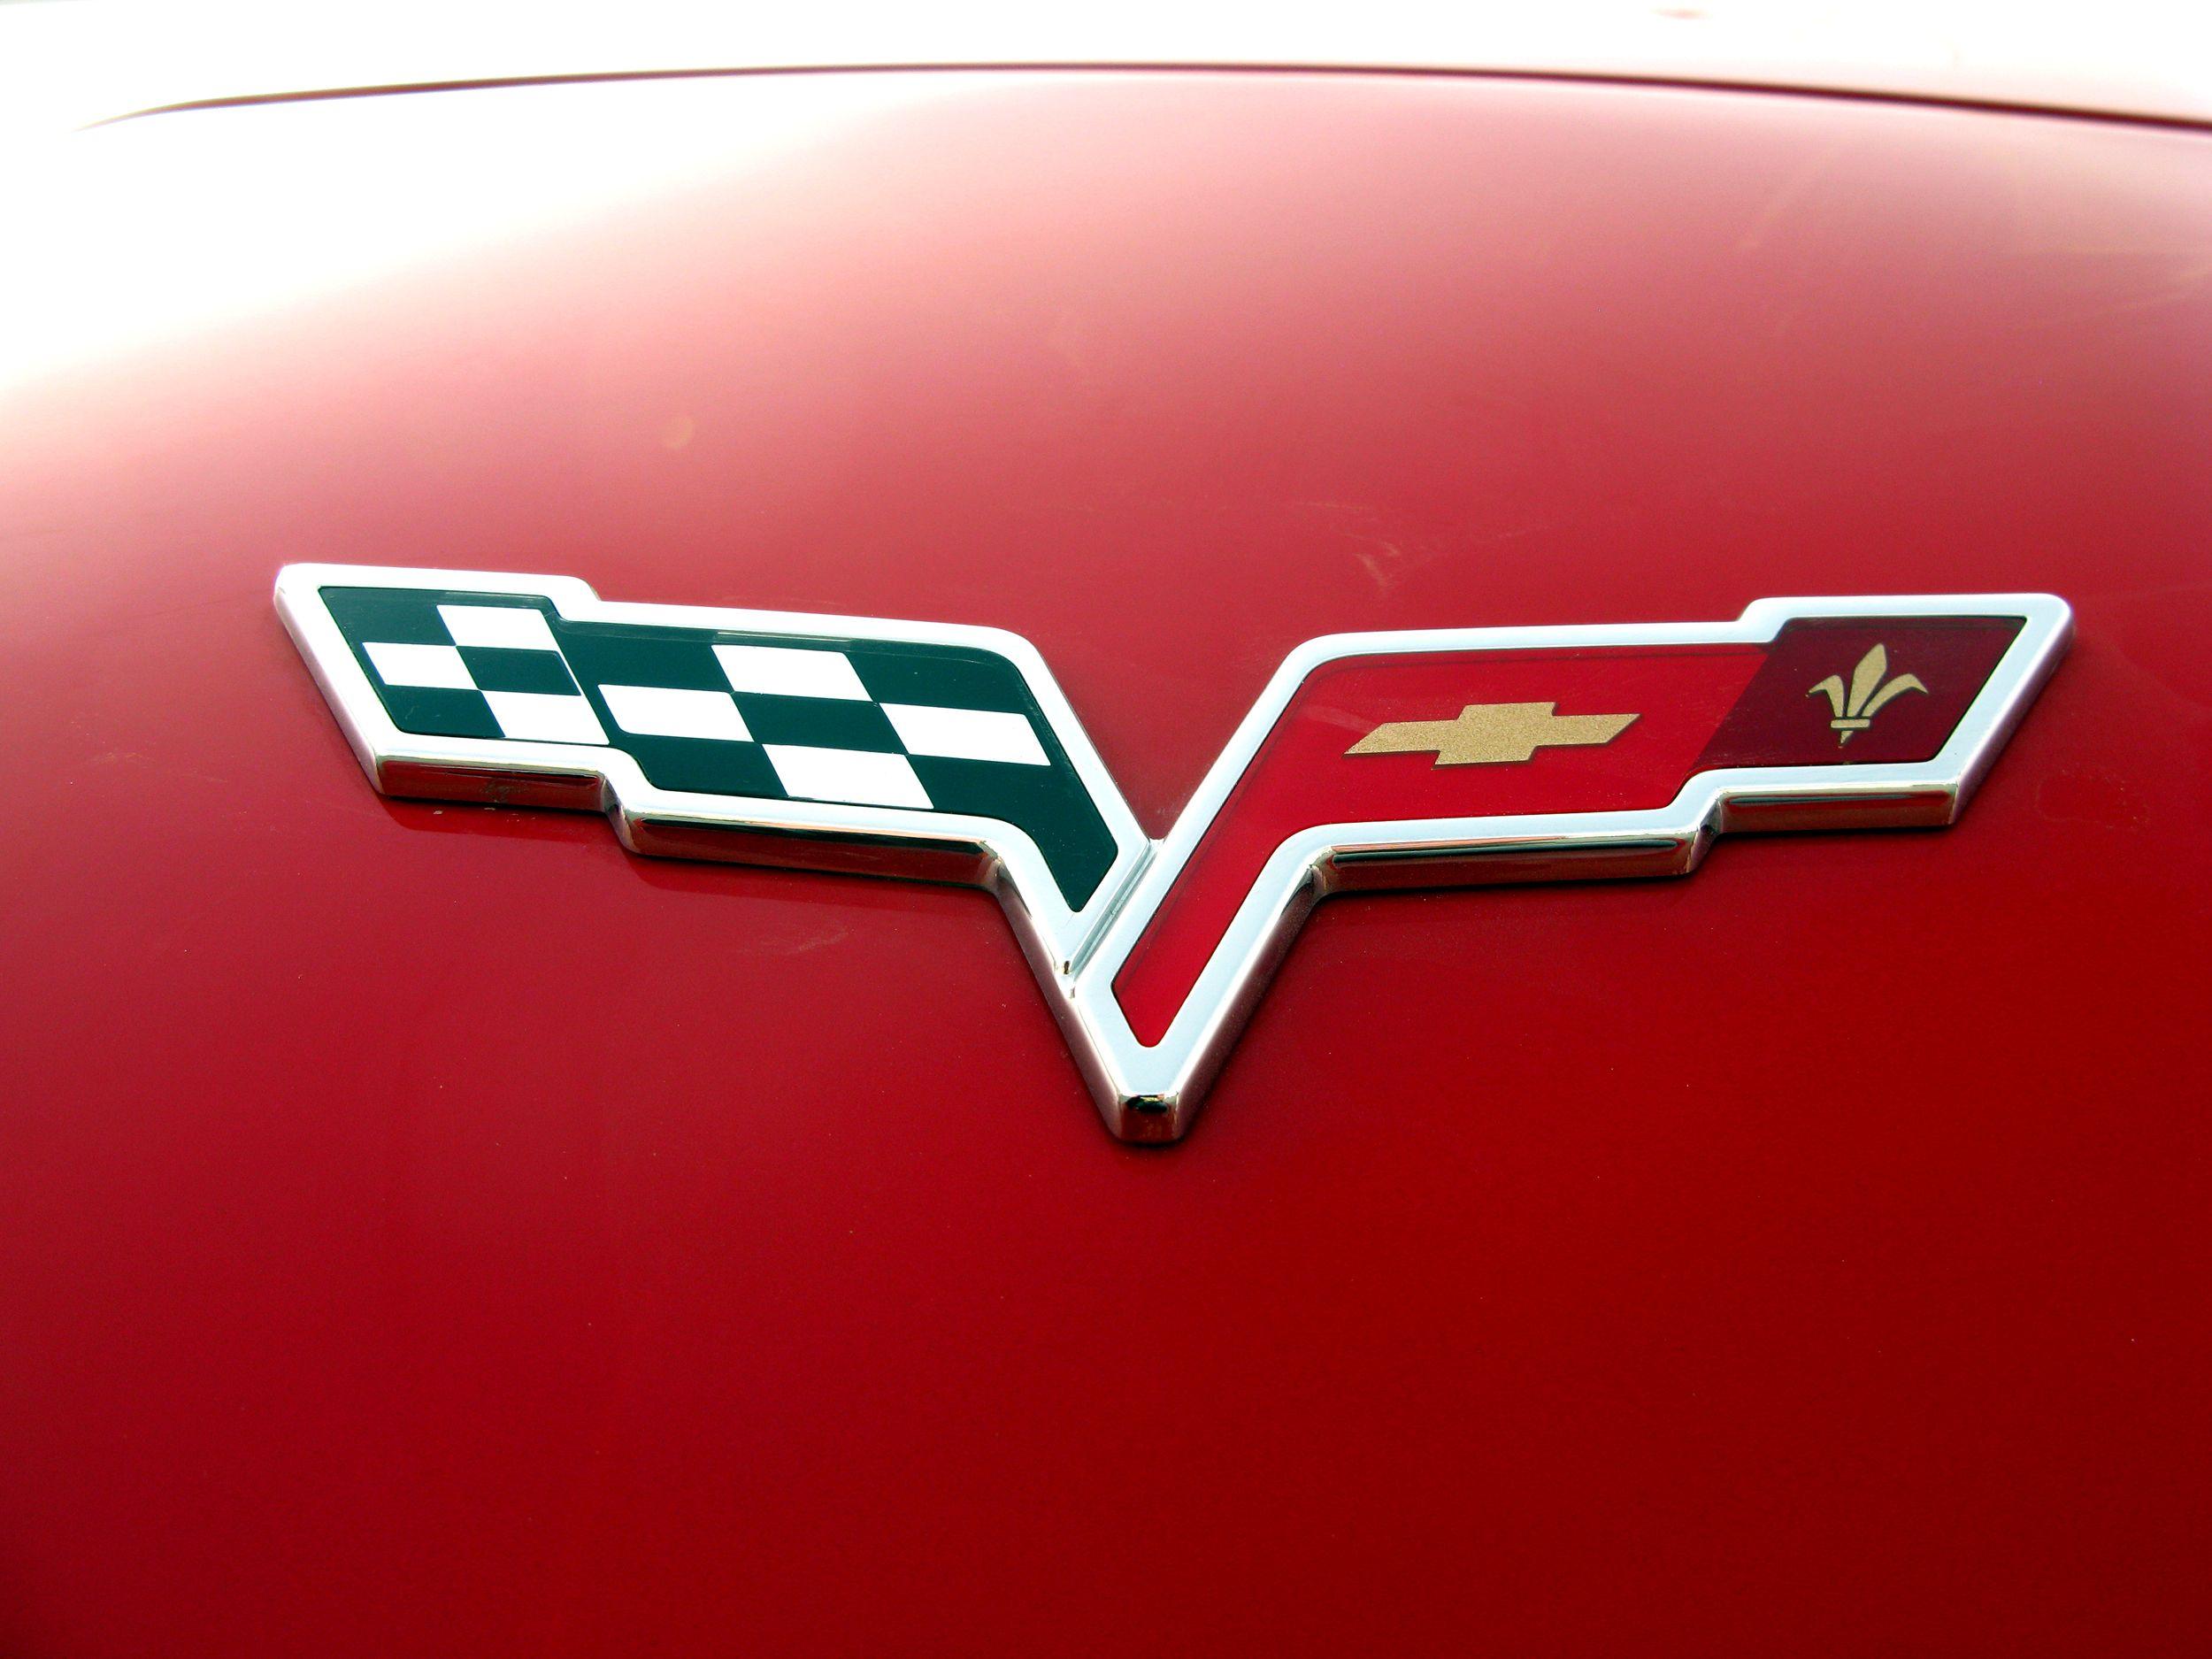 Red and White Car Logo - Chevy Logo, Chevrolet Car Symbol Meaning and History | Car Brand ...